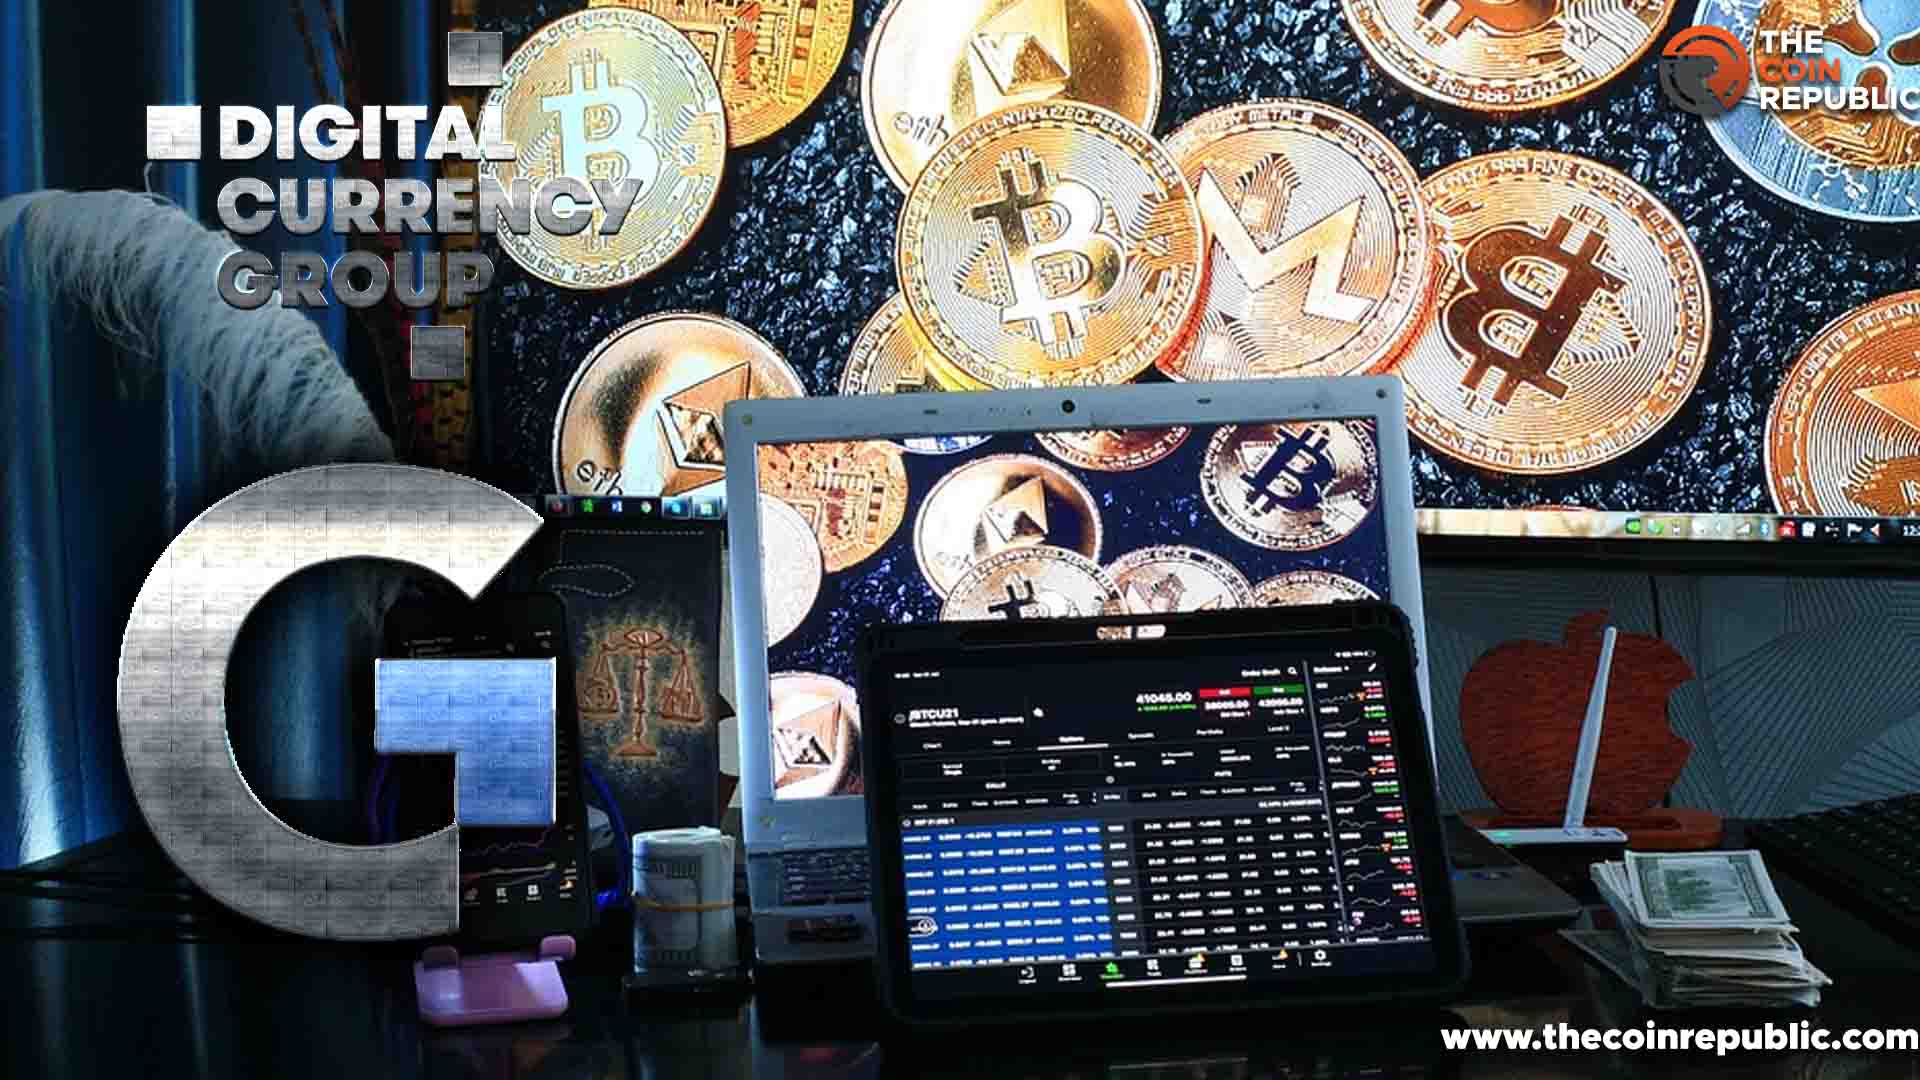 CEO of Digital Currency Group Reveals Monetary Terms With Genesis   